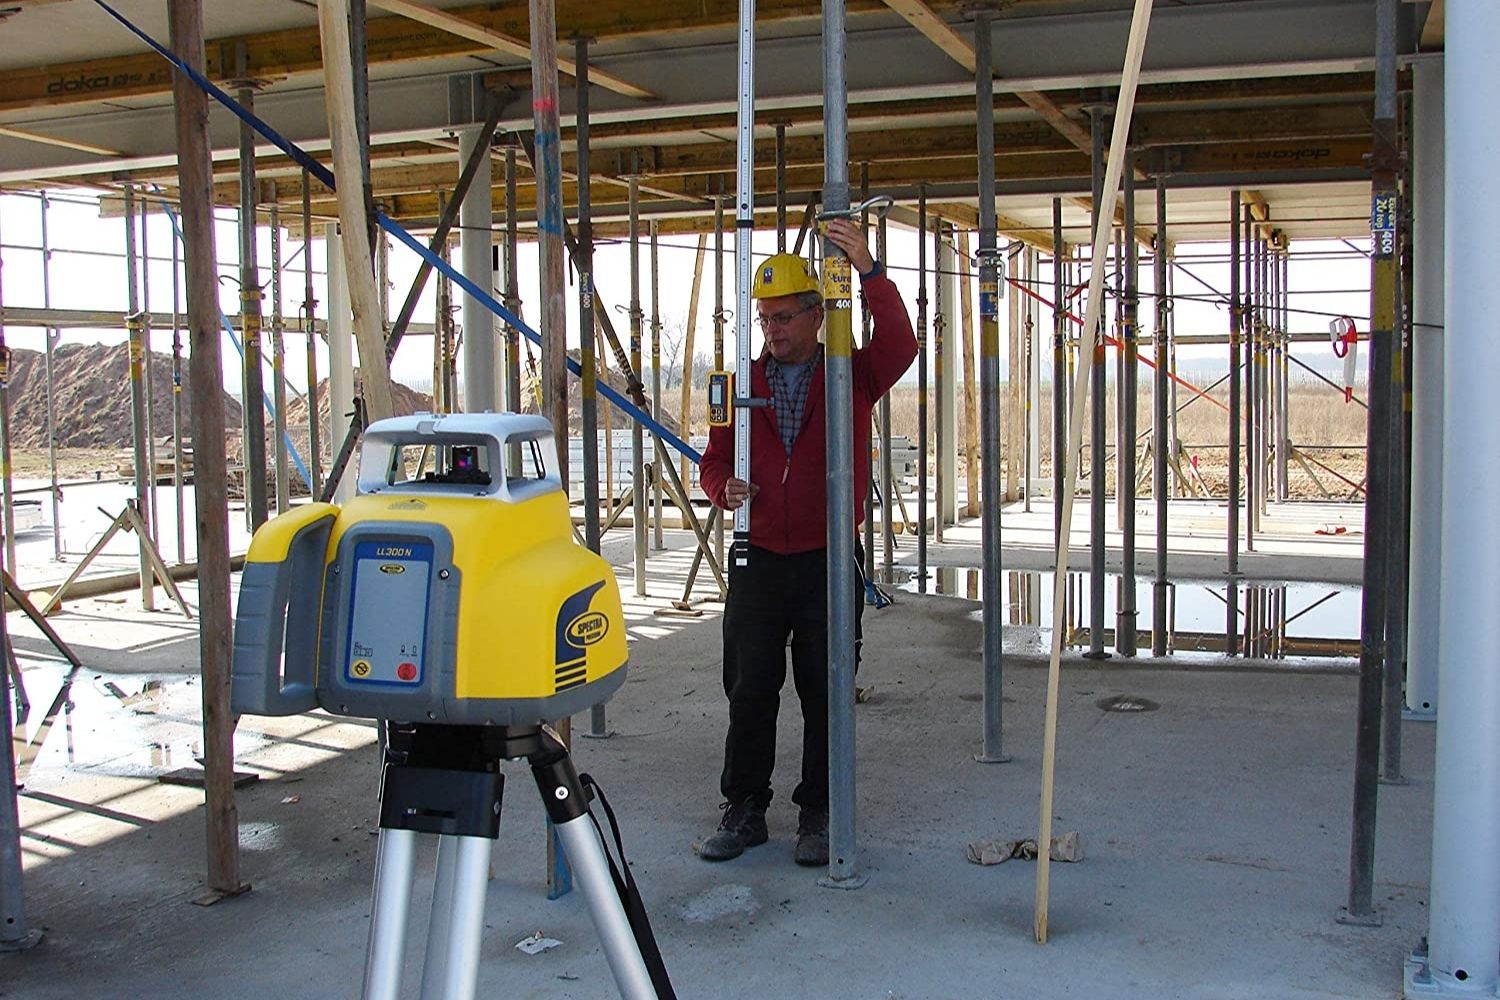 A construction worker using the best rotary laser levels option during framing of a building